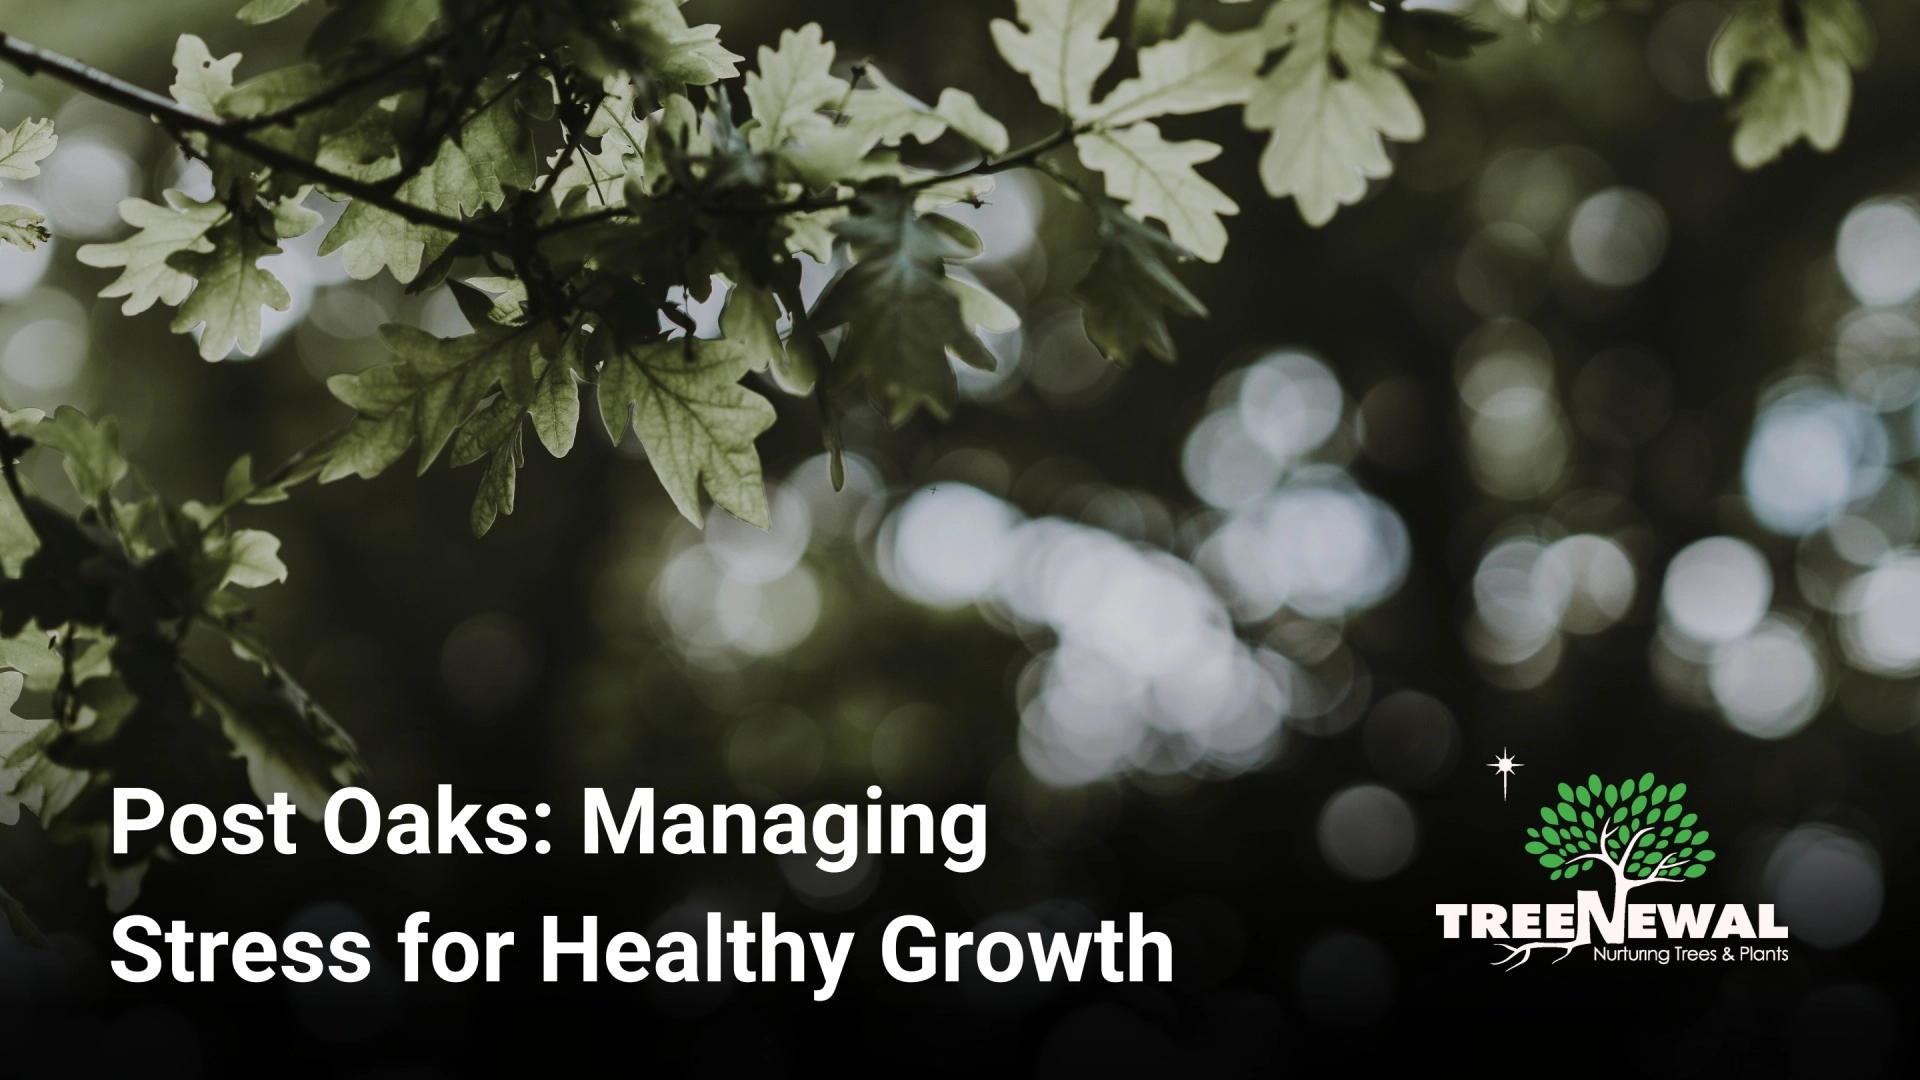 Post Oaks: Managing Stress for Healthy Growth